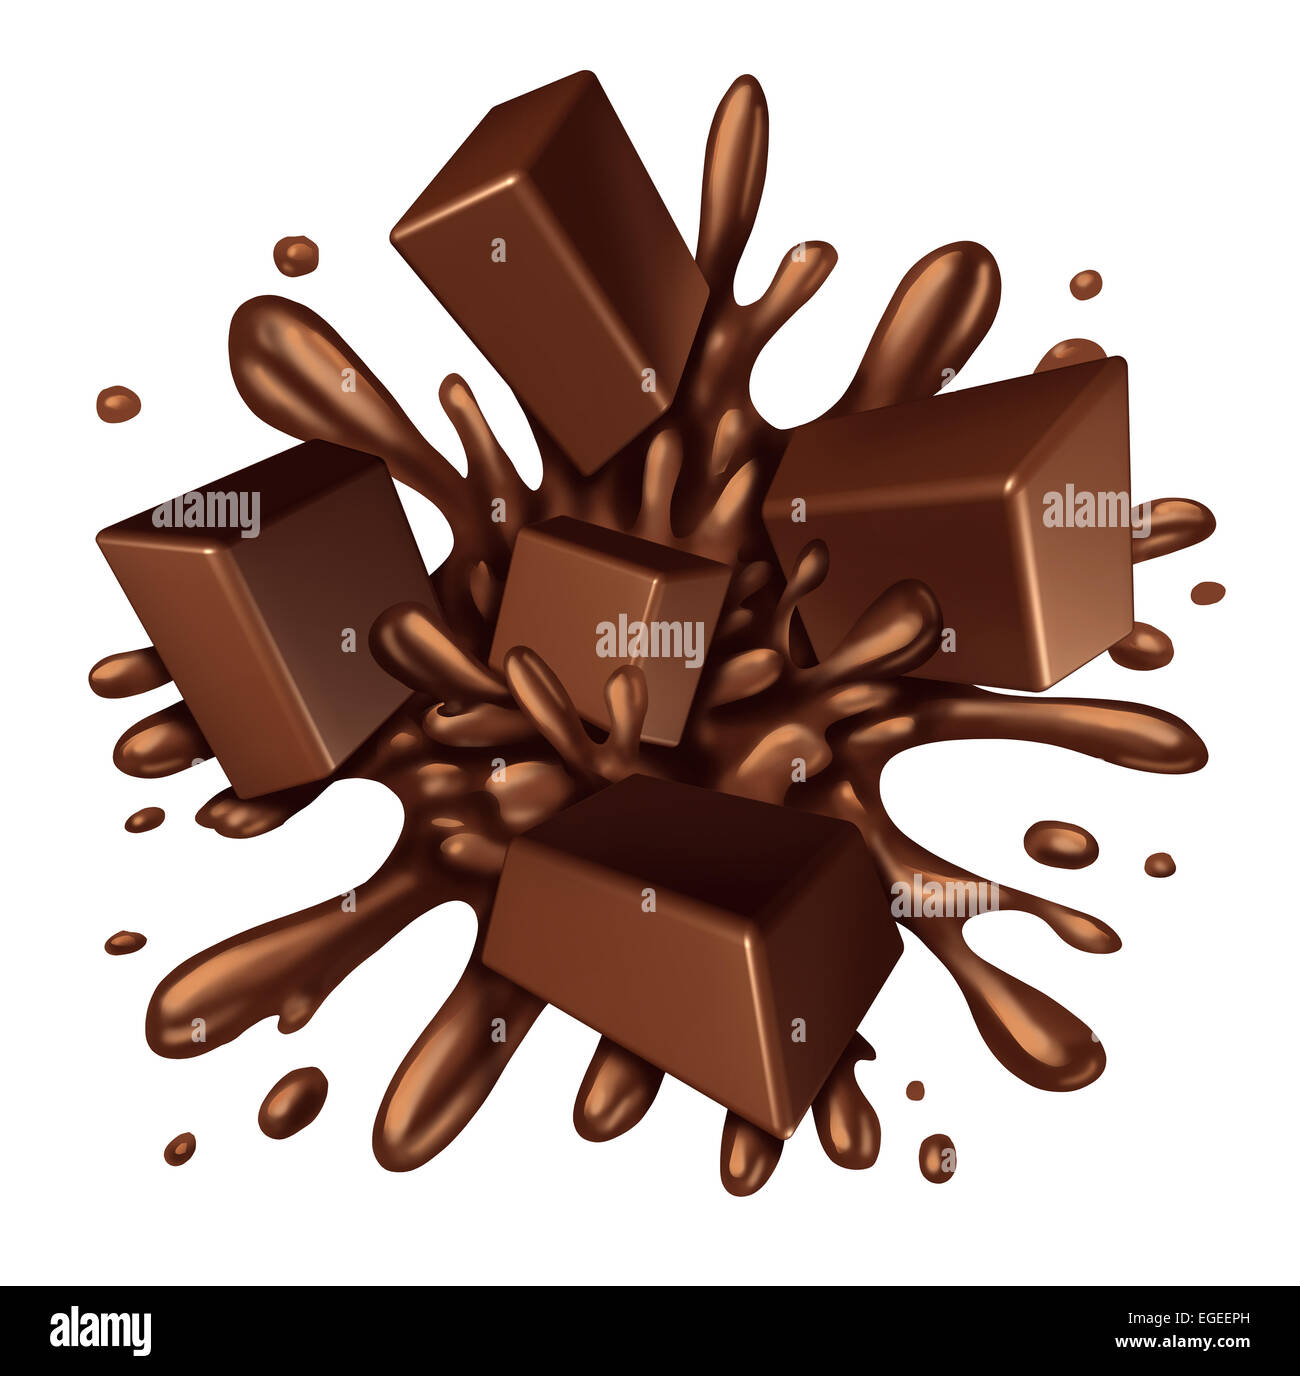 Chocolate splash liquid with chunks of melting candy exploding with a blast of dripping sweet brown syrup isolated on a white background as a food ingredient element symbol. Stock Photo